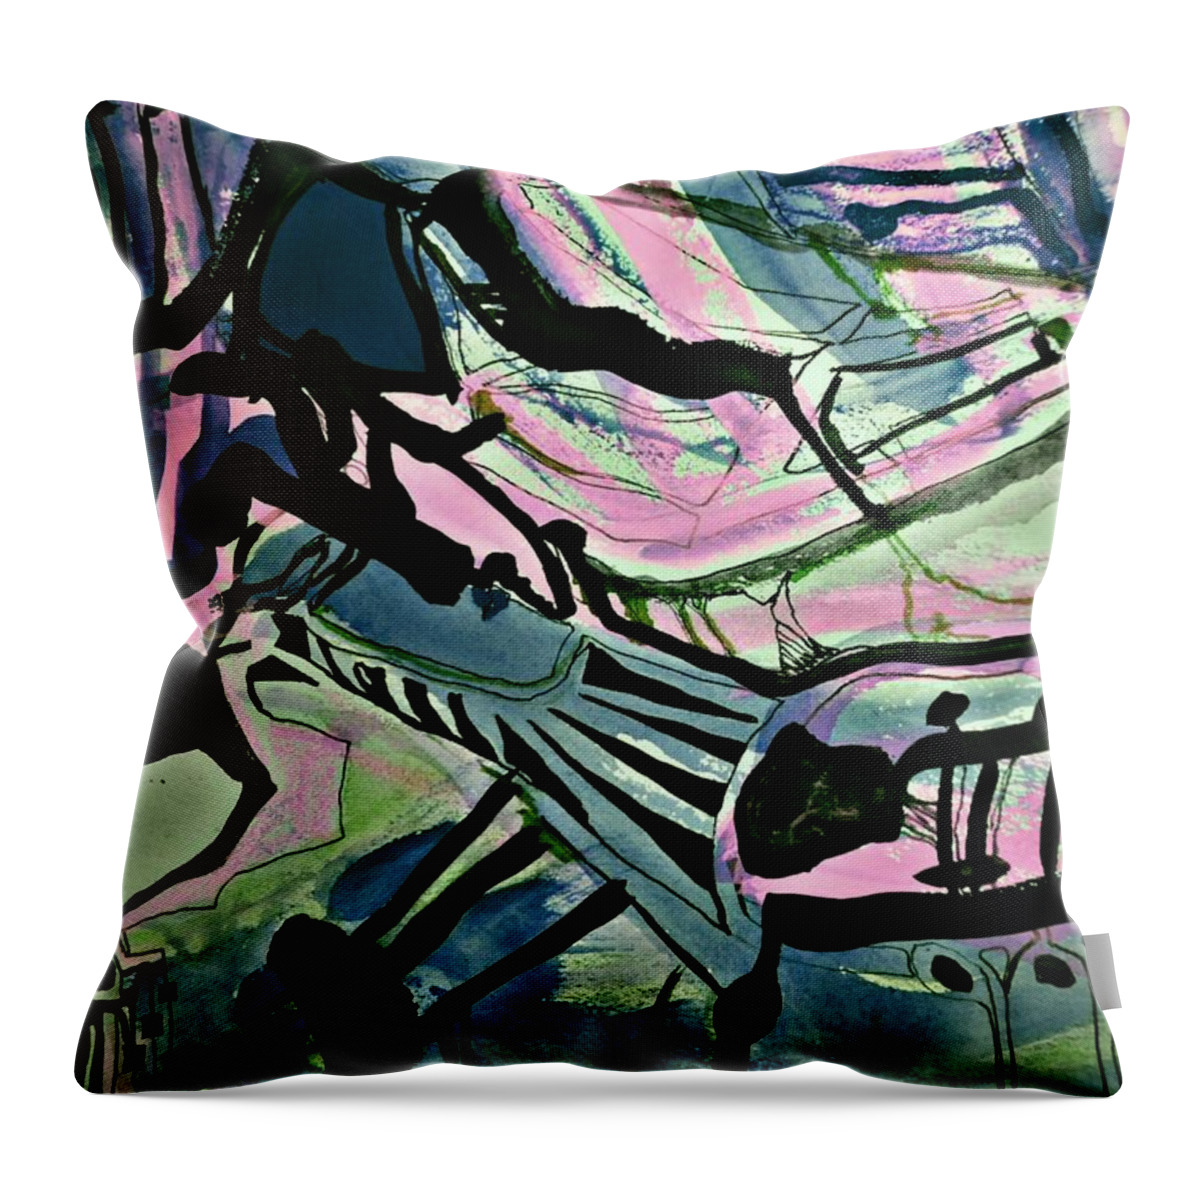 Katerina Stamatelos Art Throw Pillow featuring the painting Femme-Fatale-17 by Katerina Stamatelos